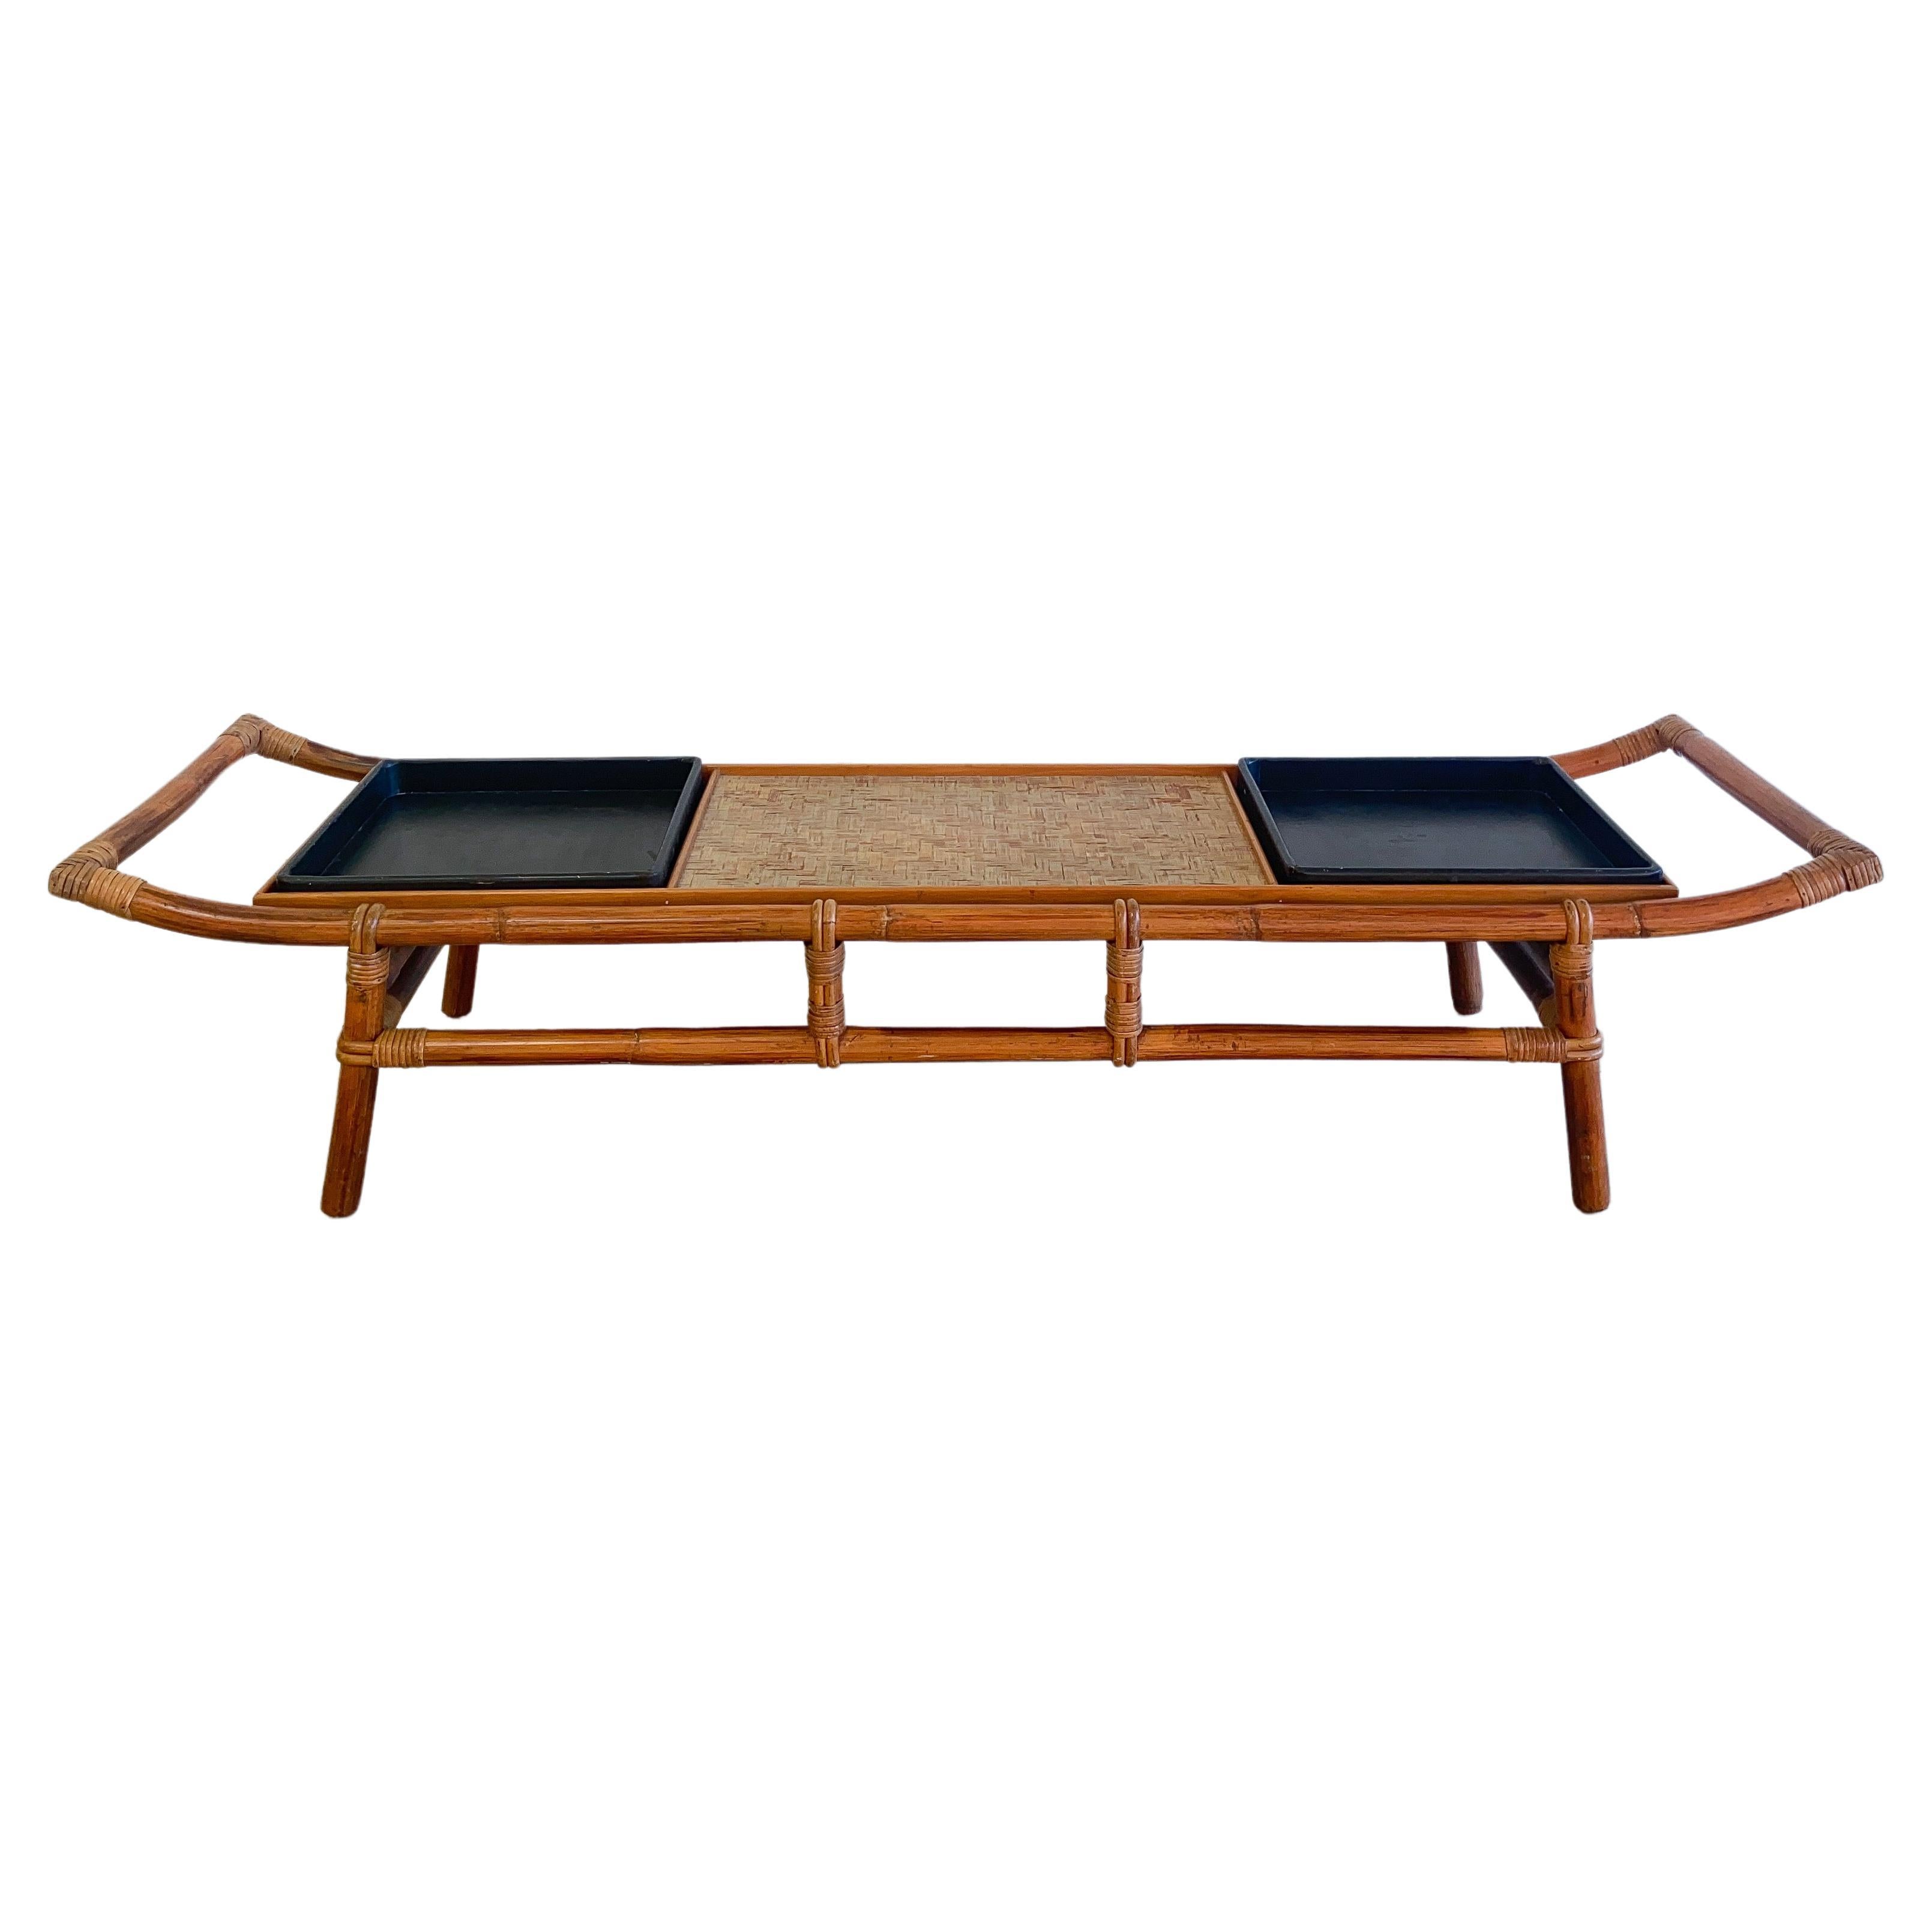 John Wisner for Ficks Reed Pagoda Coffee Table/Bench, Bamboo and Cane, 1950's